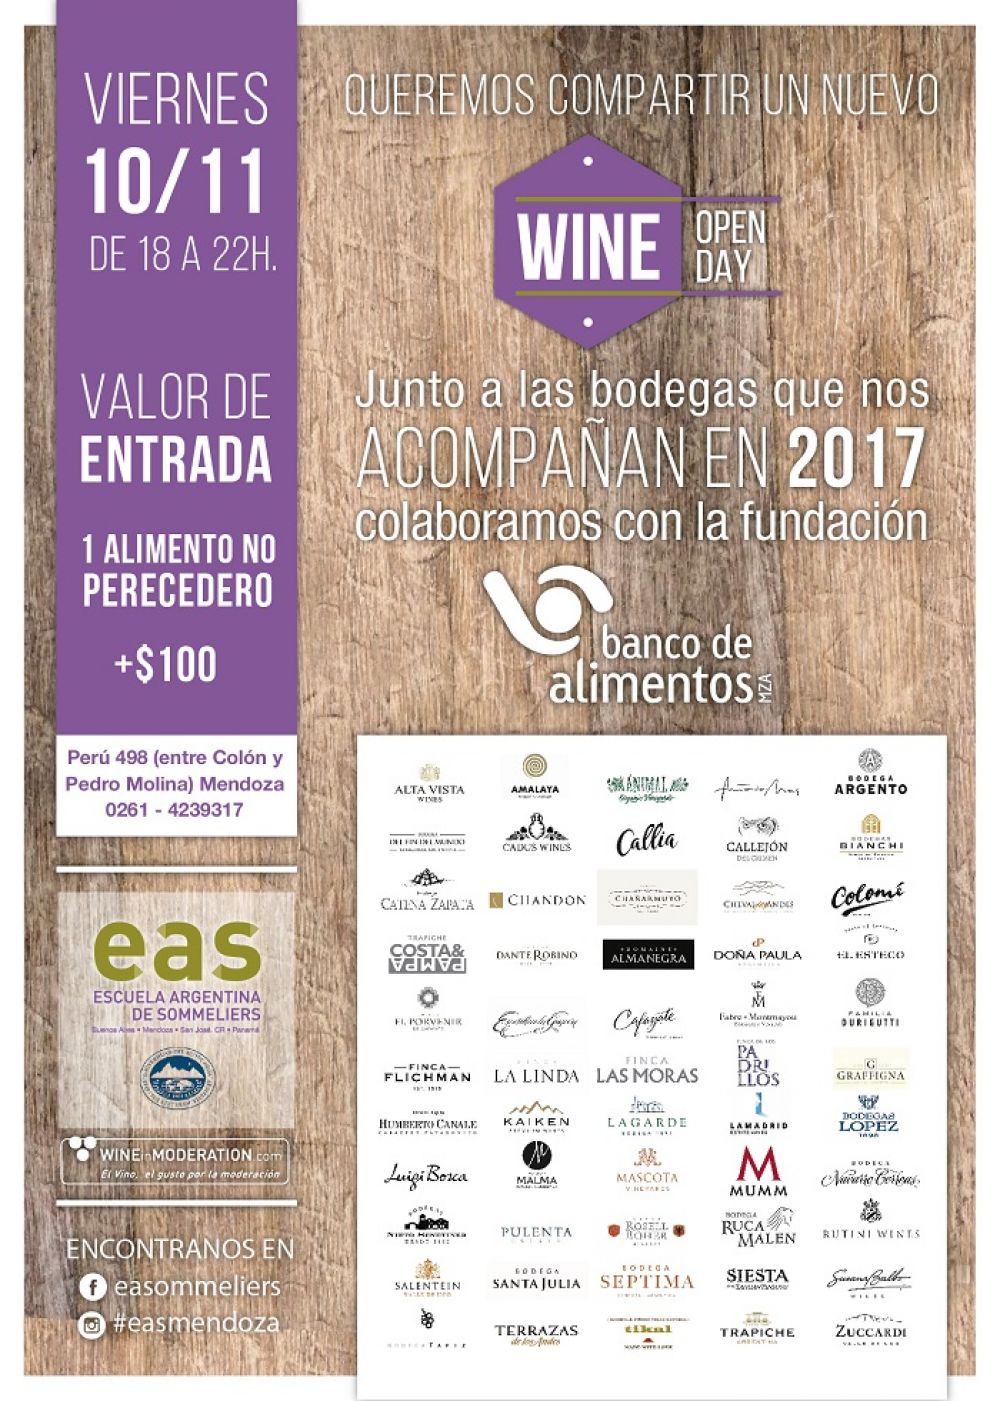 The Argentinian Wine Open Day